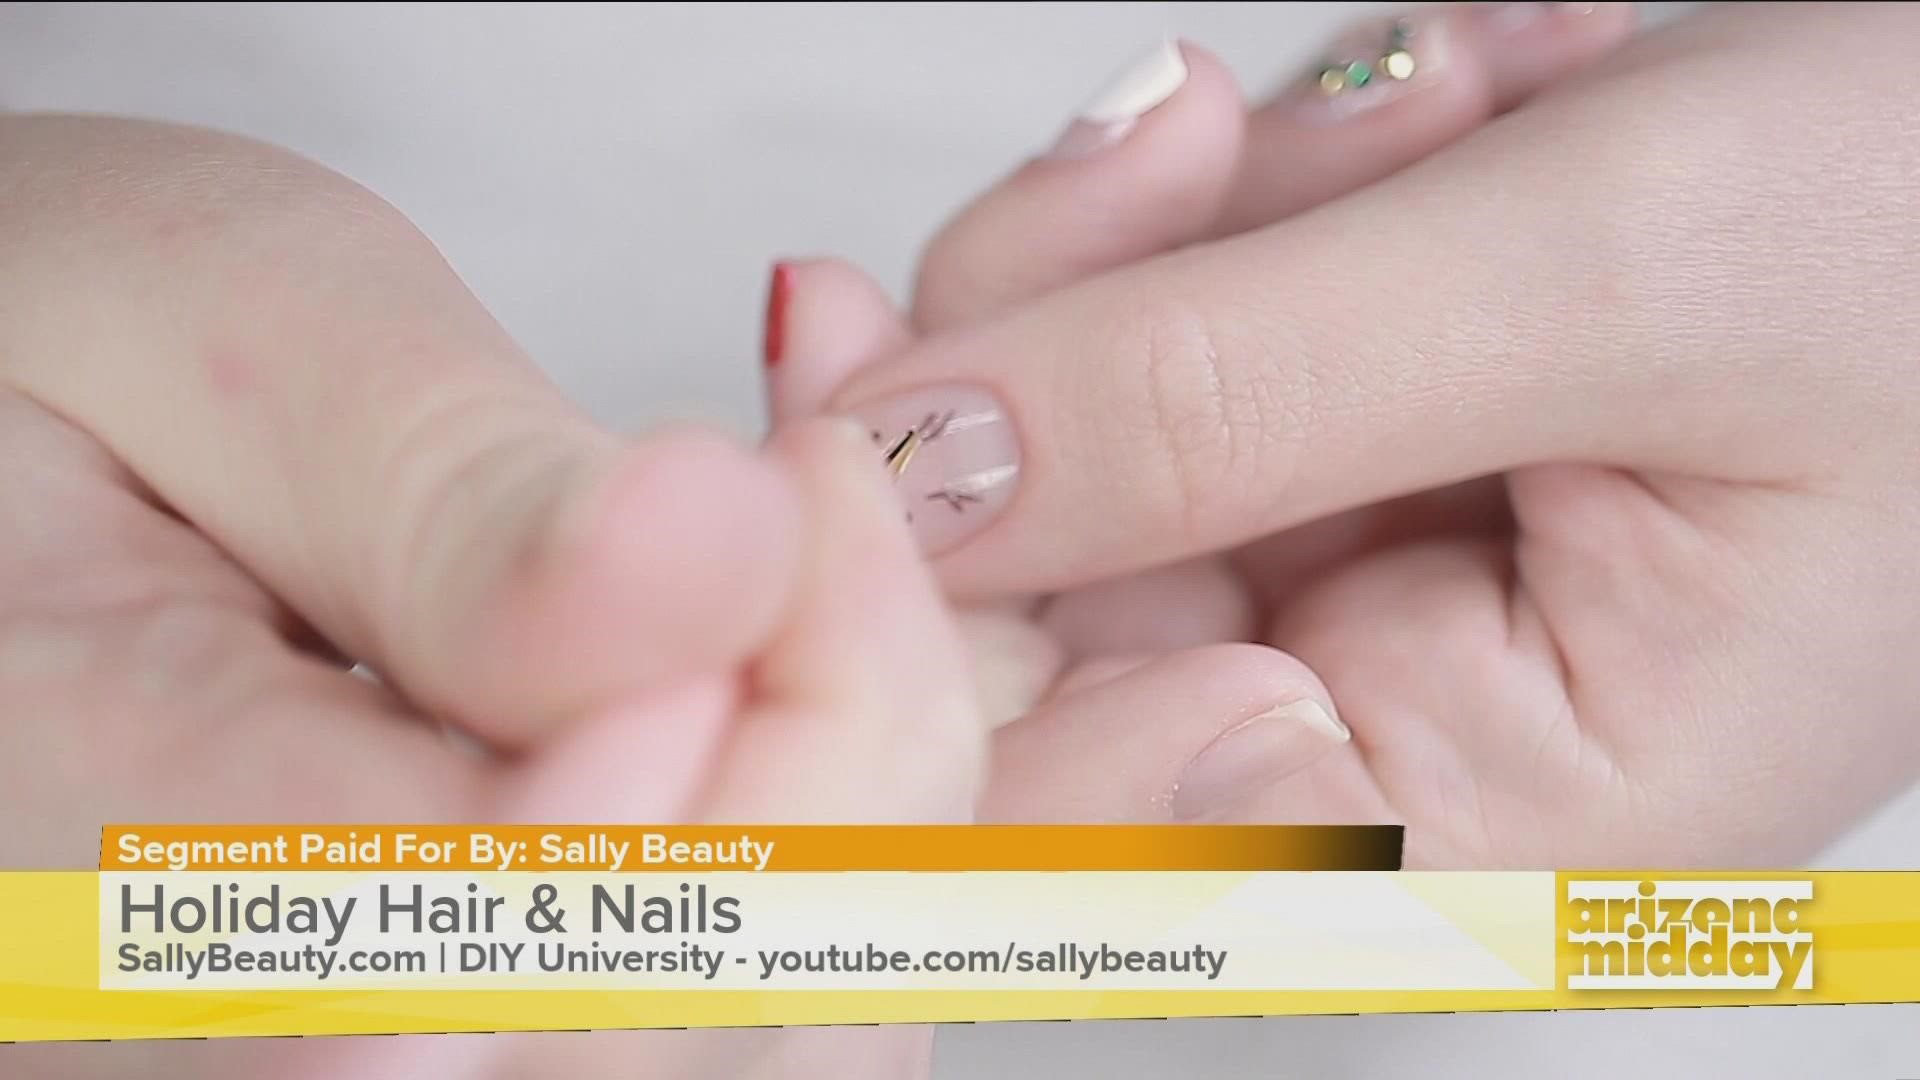 Gregory Patterson and Juli Russell have the scoop on holiday hair and nail trends. Learn how to do it all at Sally Beauty's DIY University!